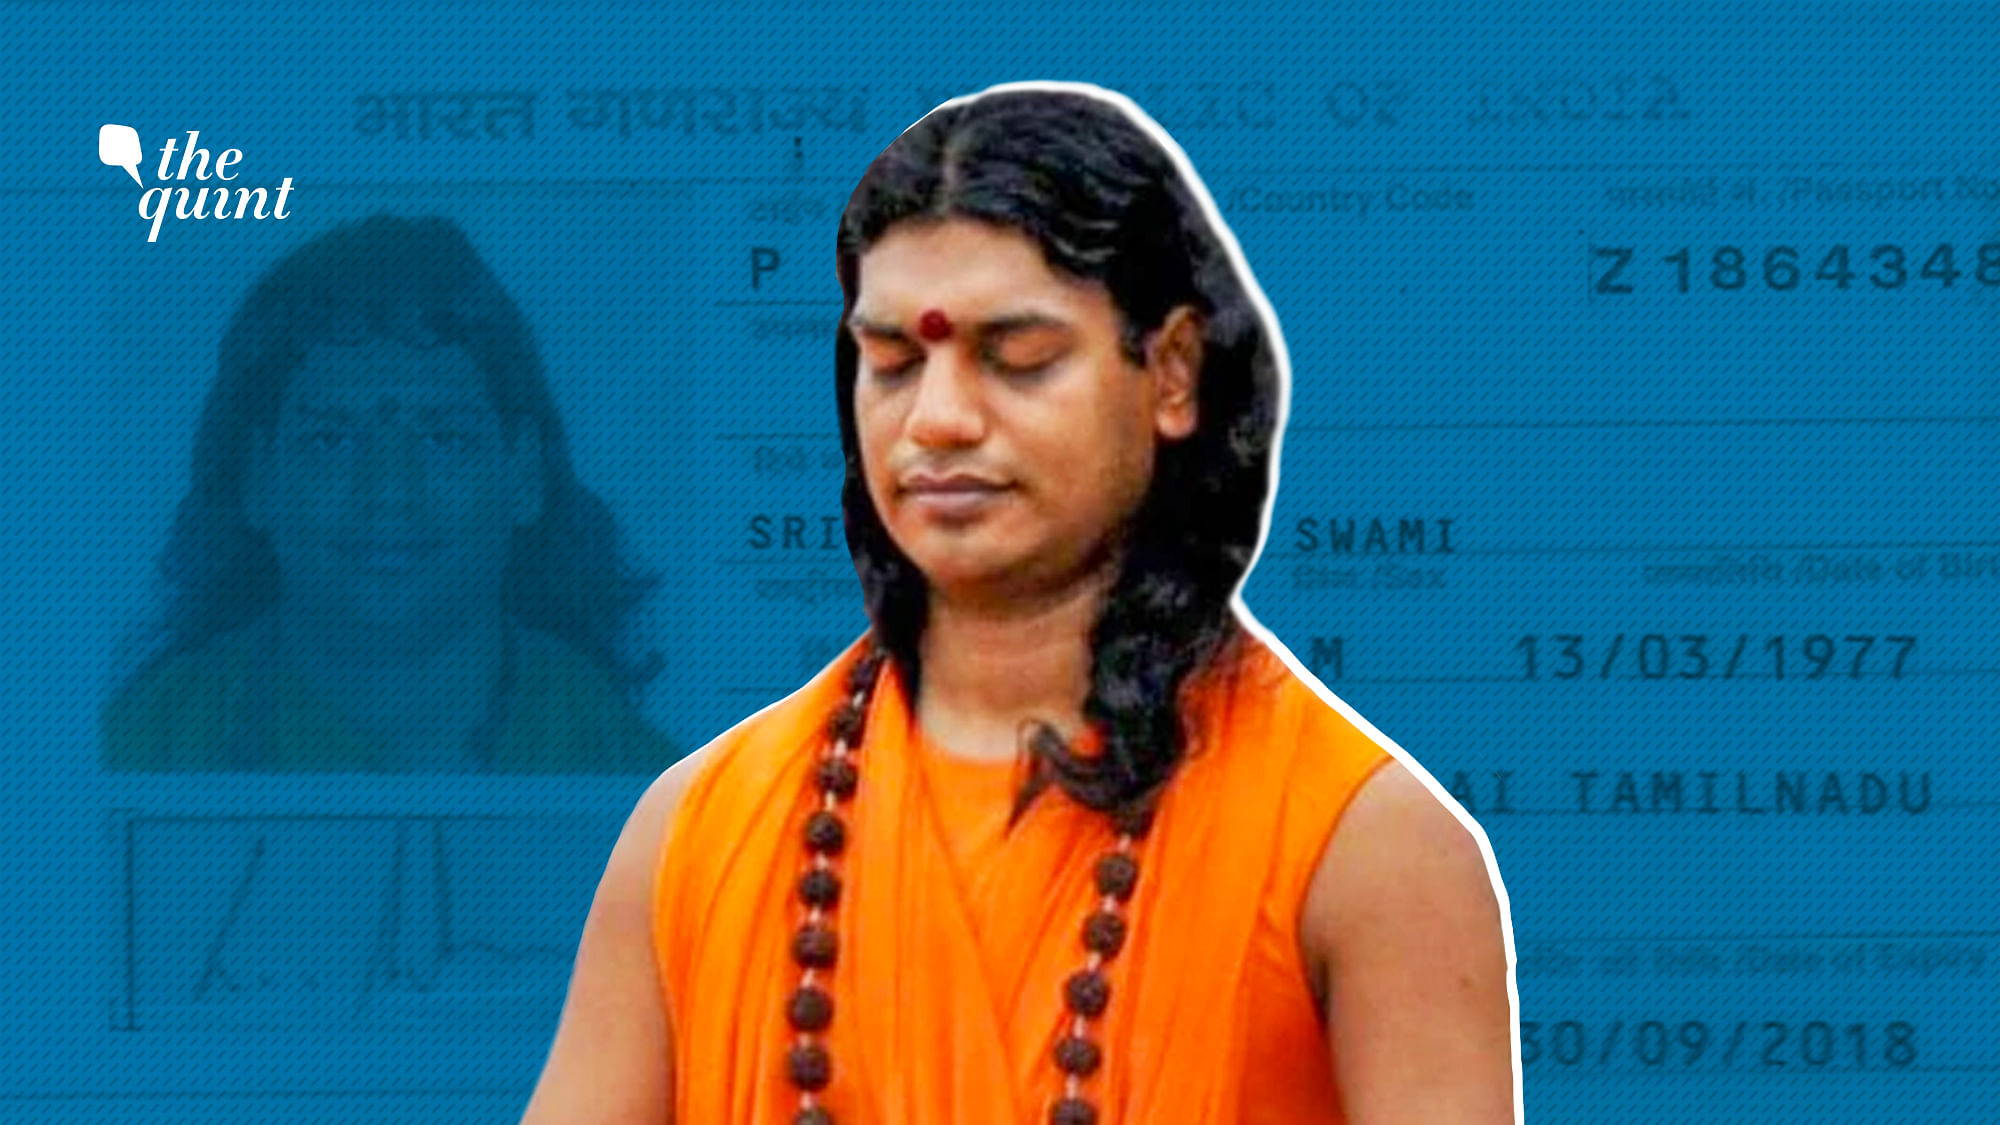 A case of rape was registered against Nithyananda in 2010 after a US citizen accused him of raping her for over five years under the guise of spirituality.